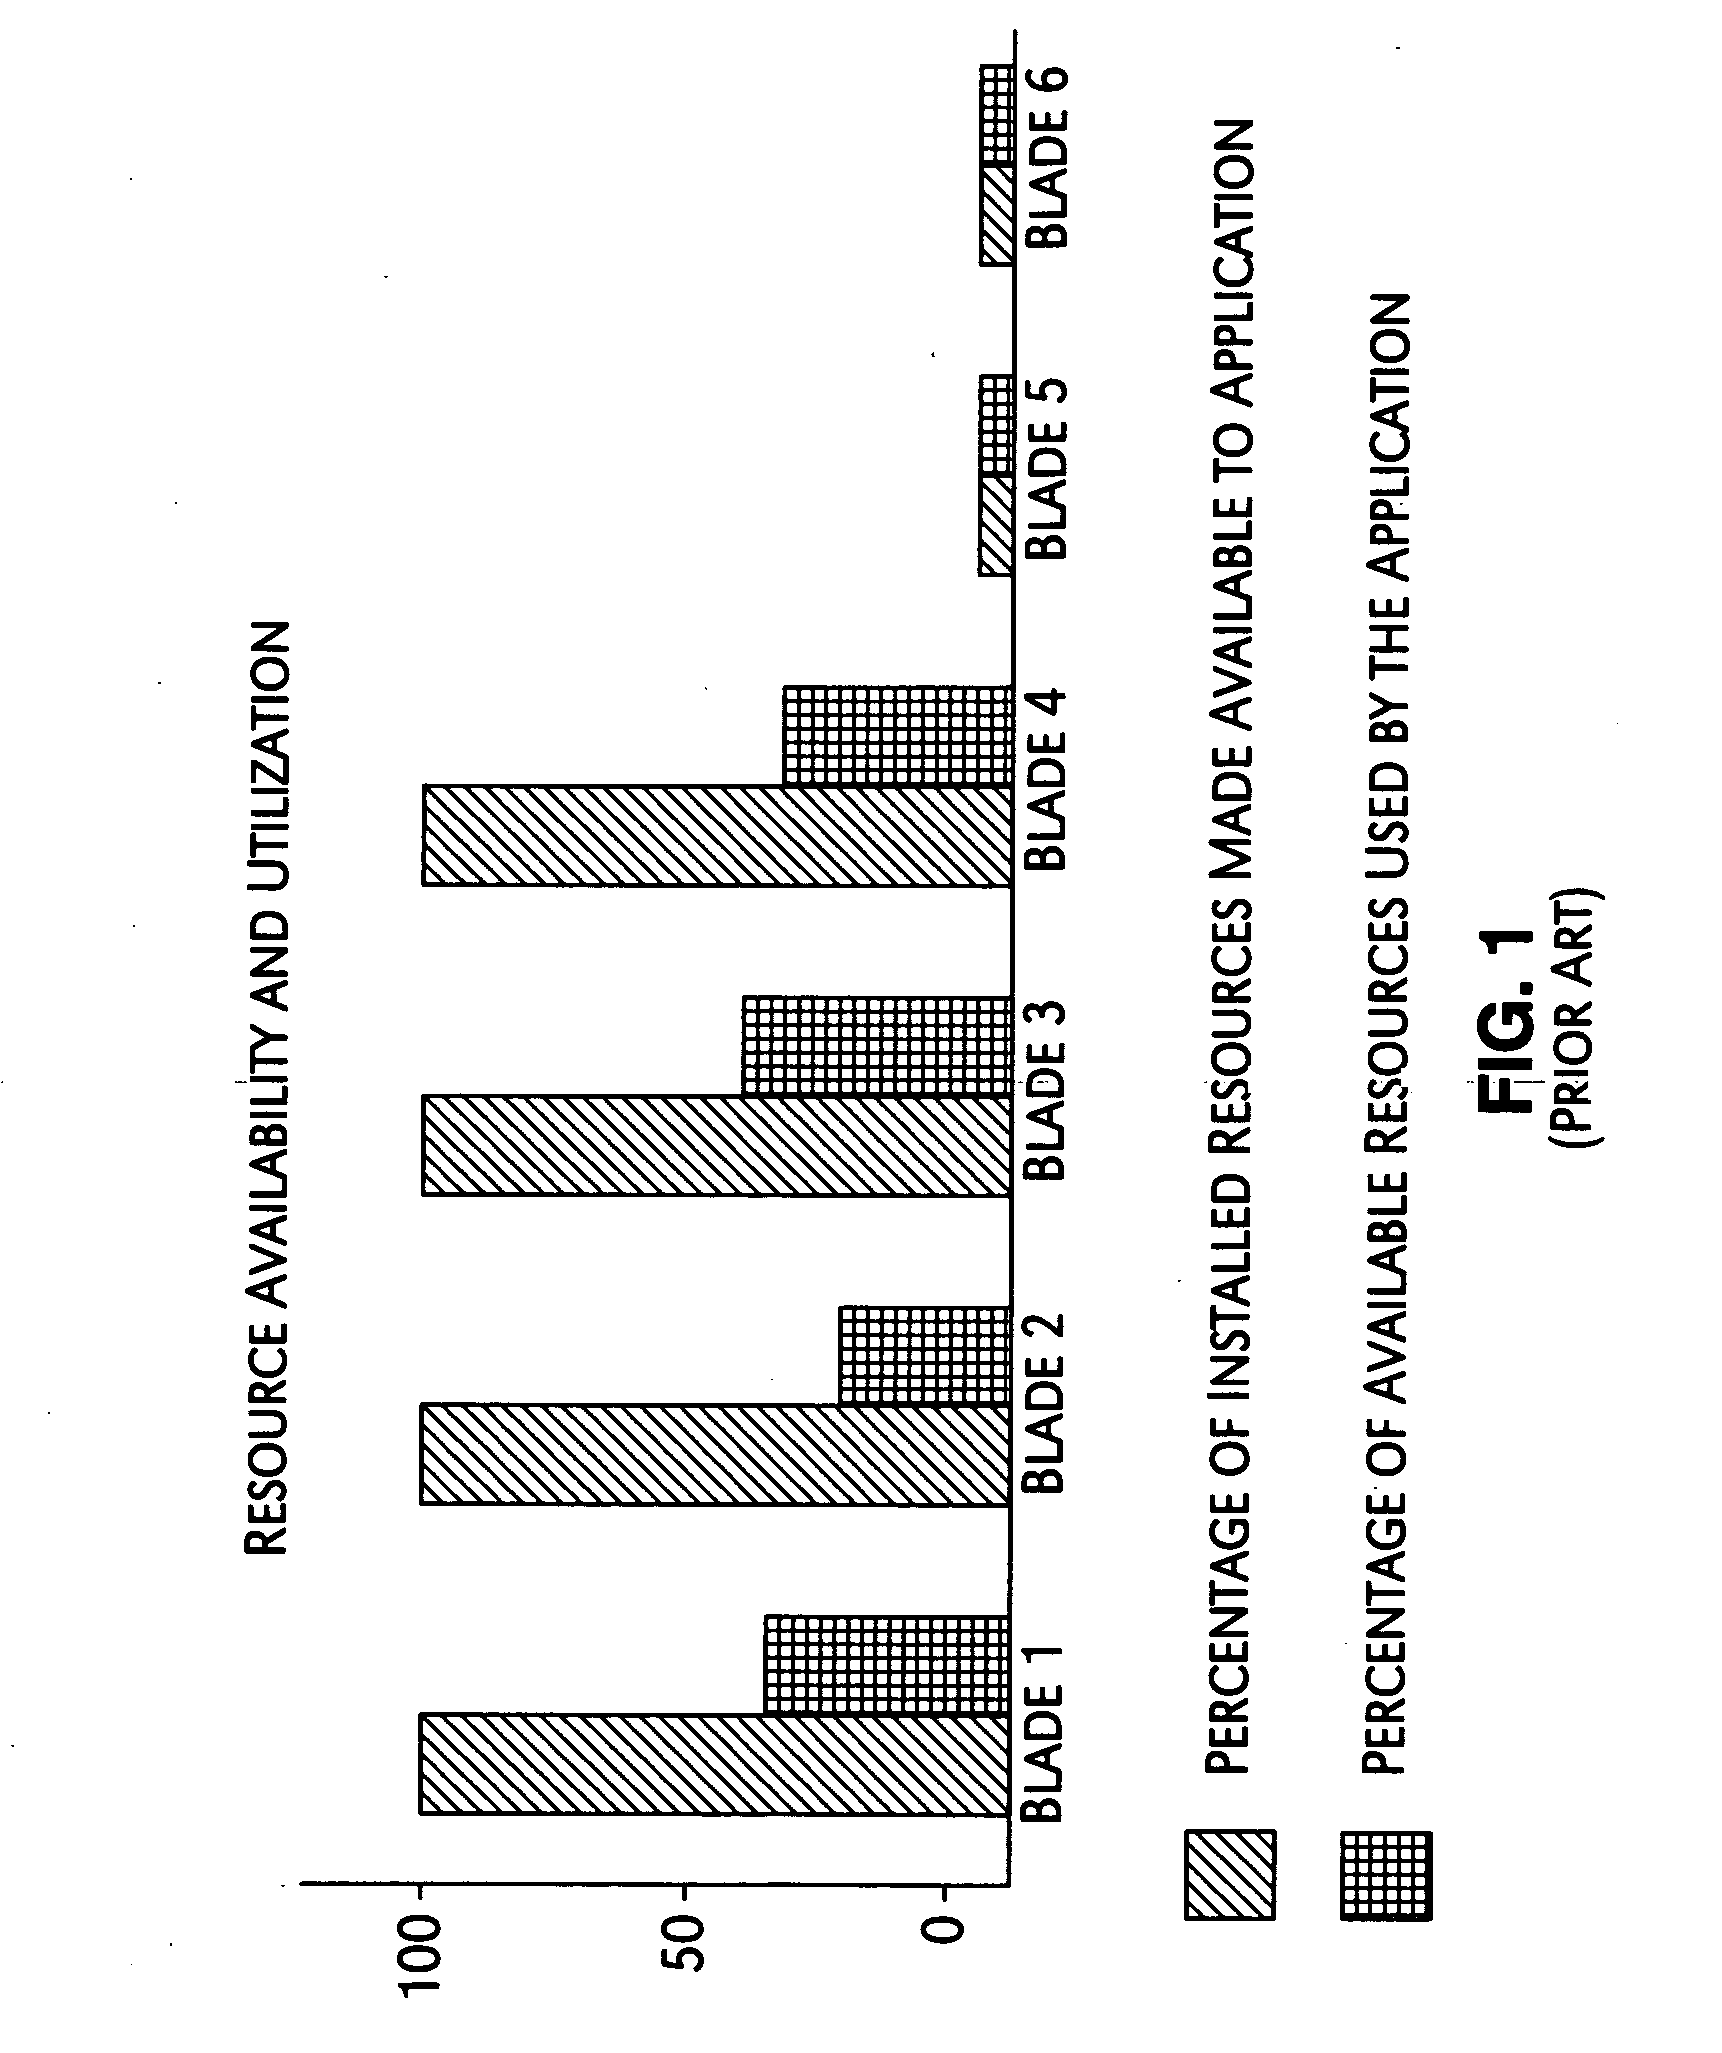 System and method for maximizing server utilization in a resource constrained environment